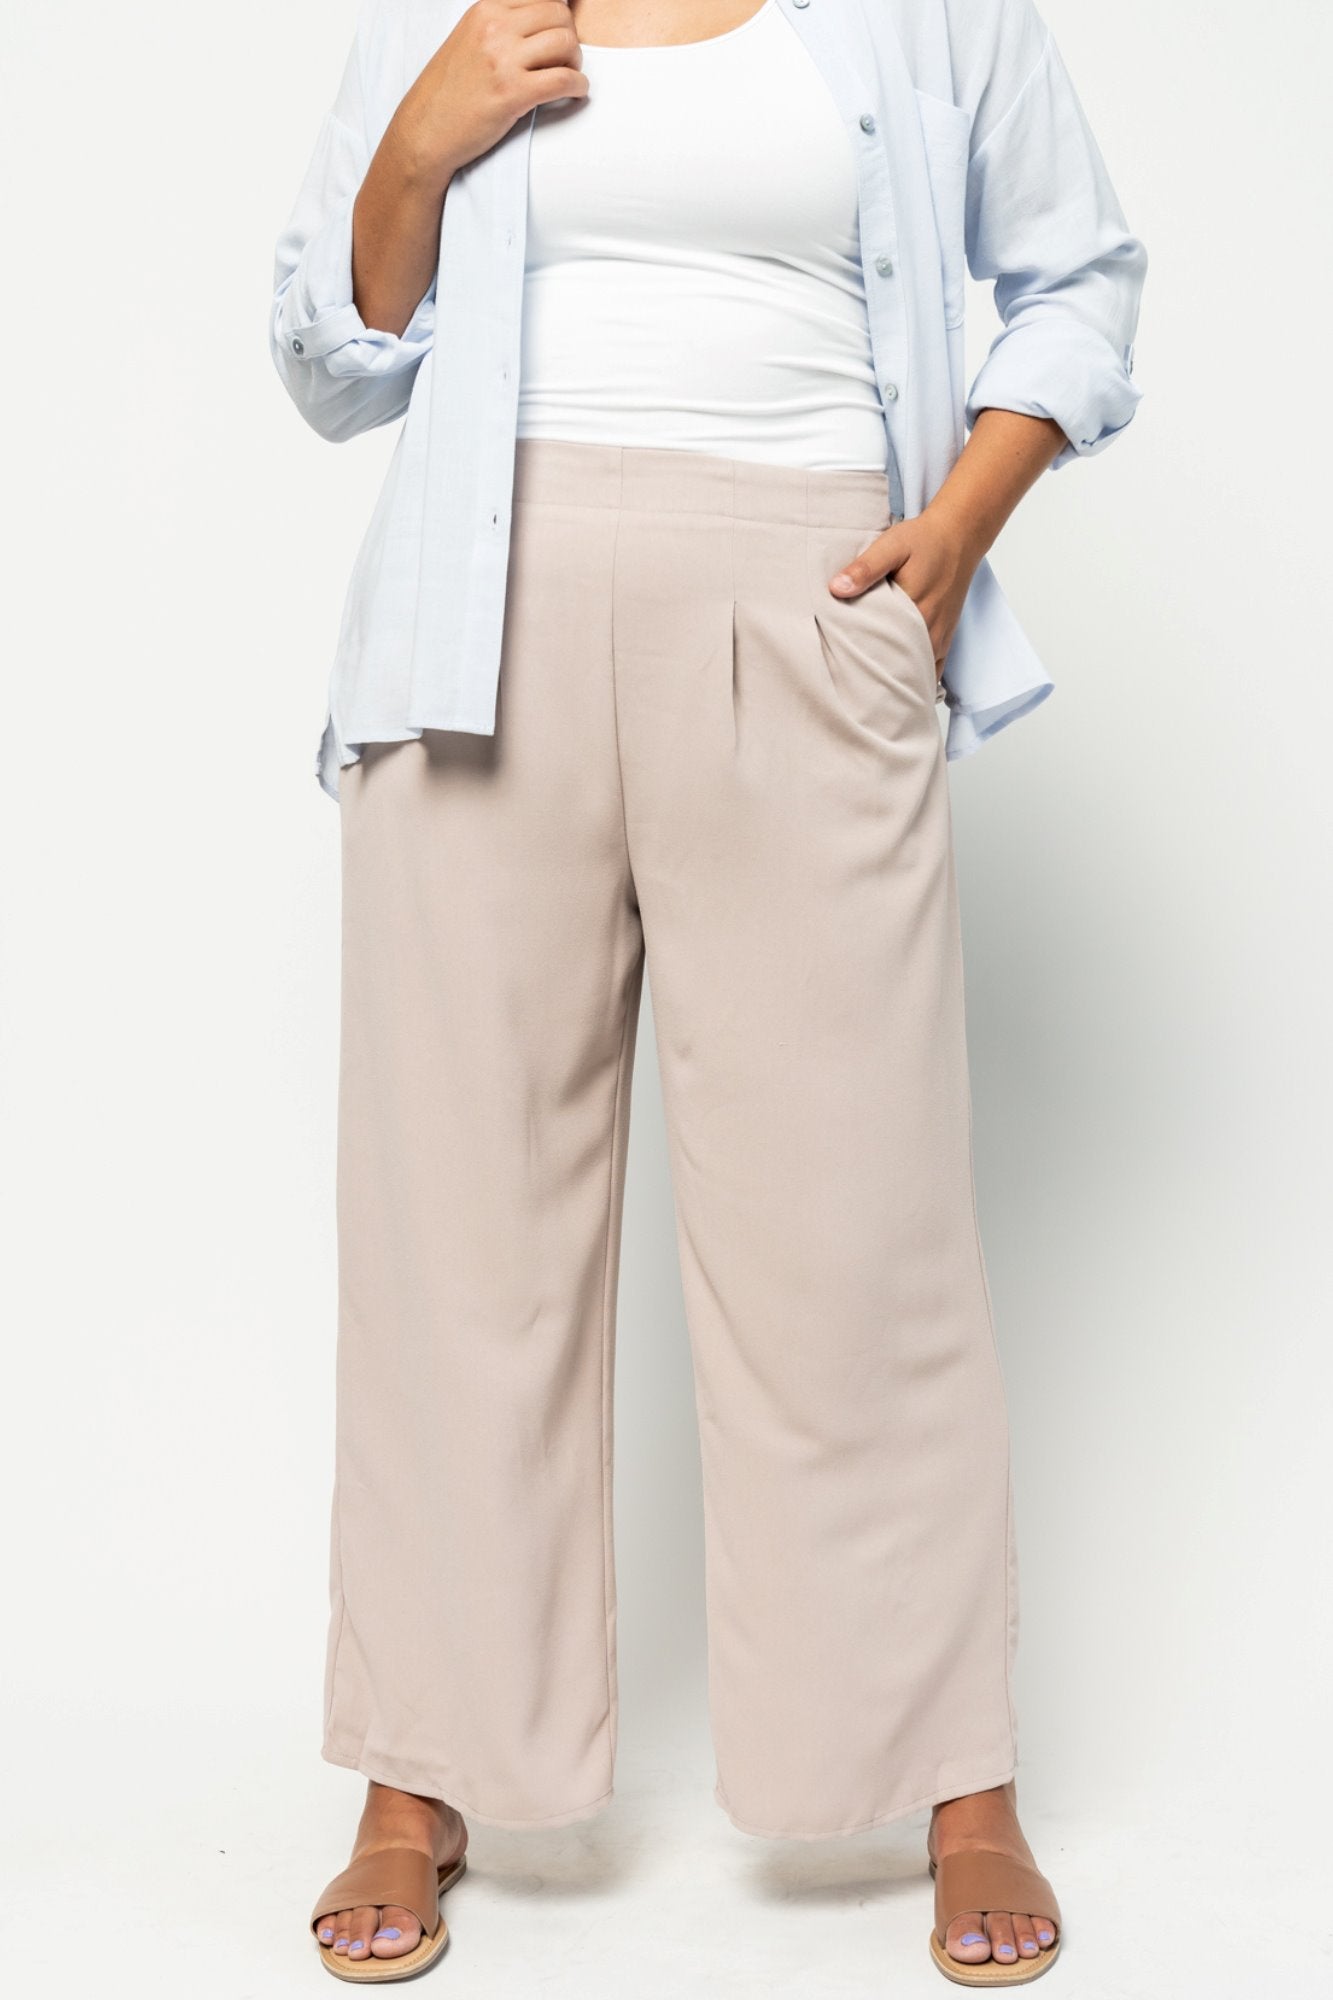 Easton Pant in Taupe (Small-XL) Holley Girl 